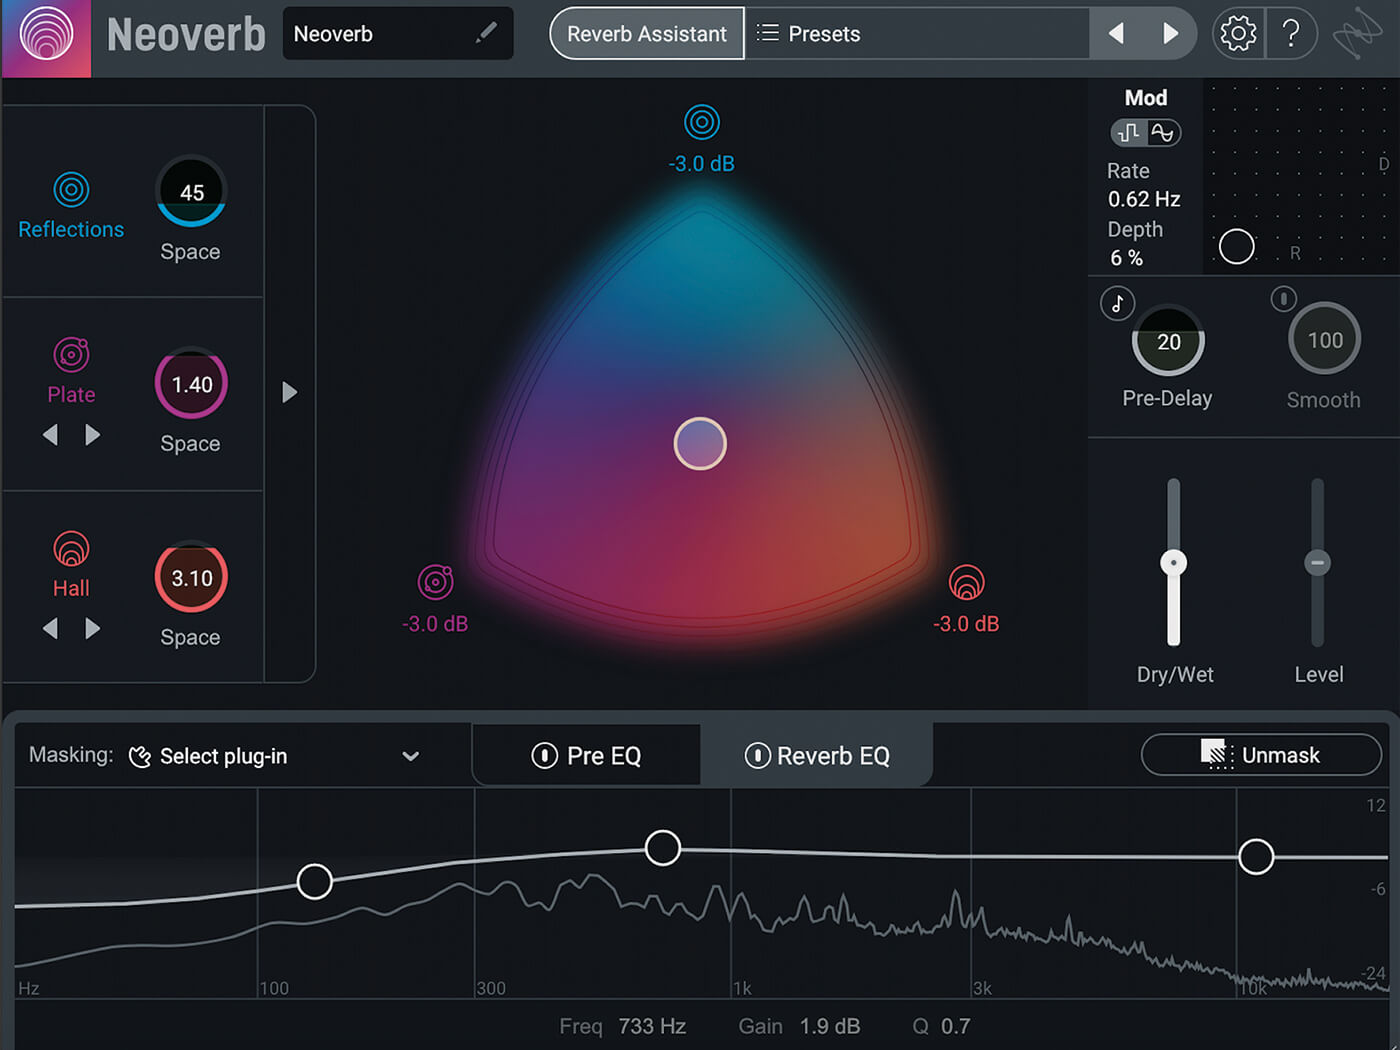 iZotope NeoVerb